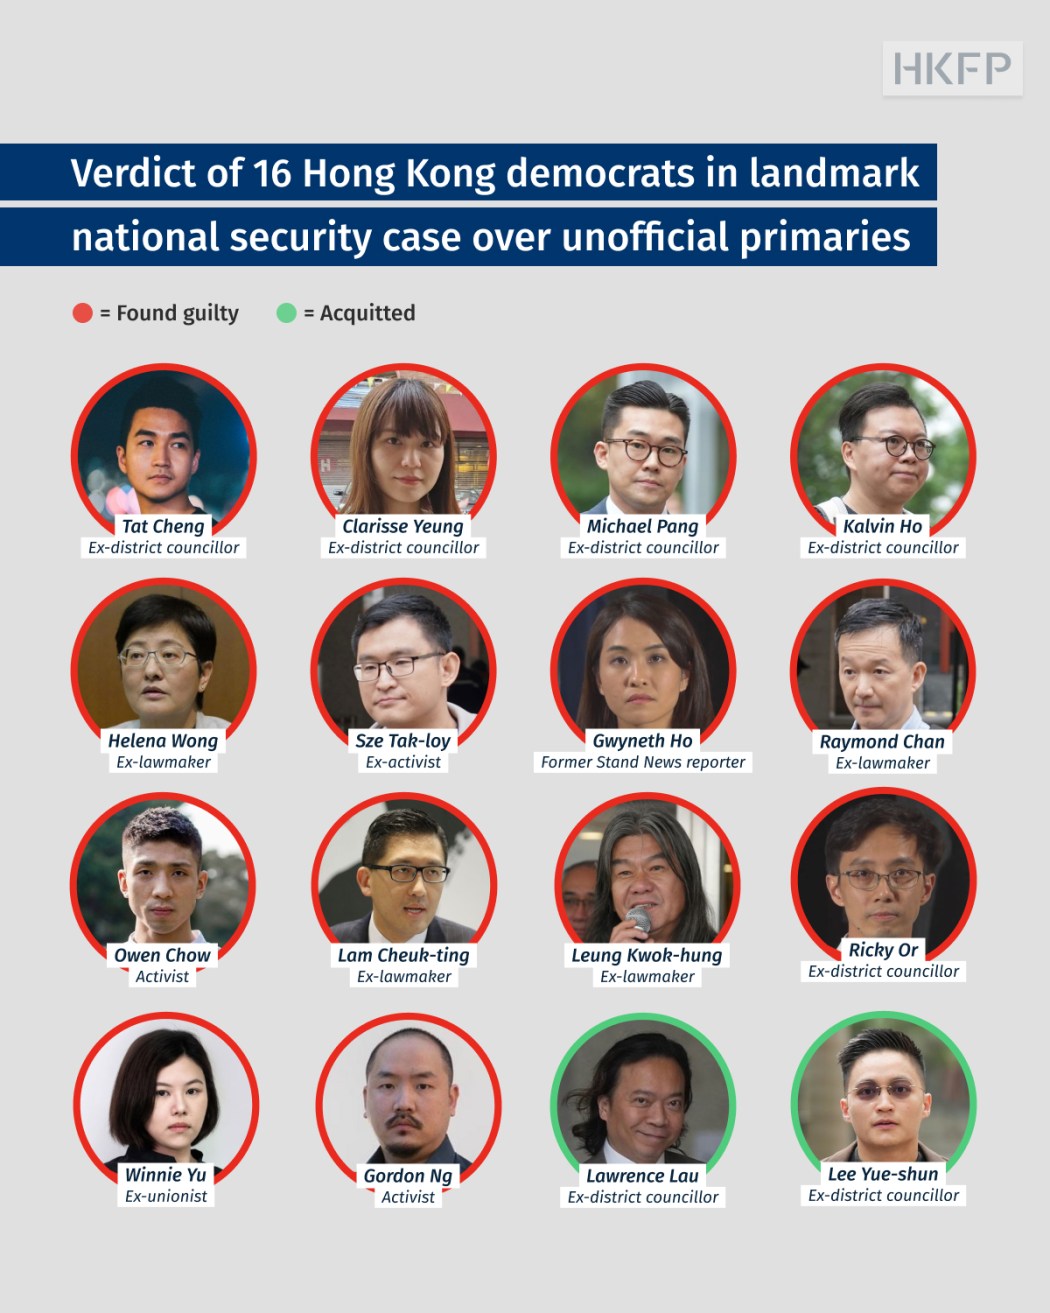 The verdict of 16 Hong Kong democrats who have pleaded not guilty in landmark national security case over unofficial primaries.